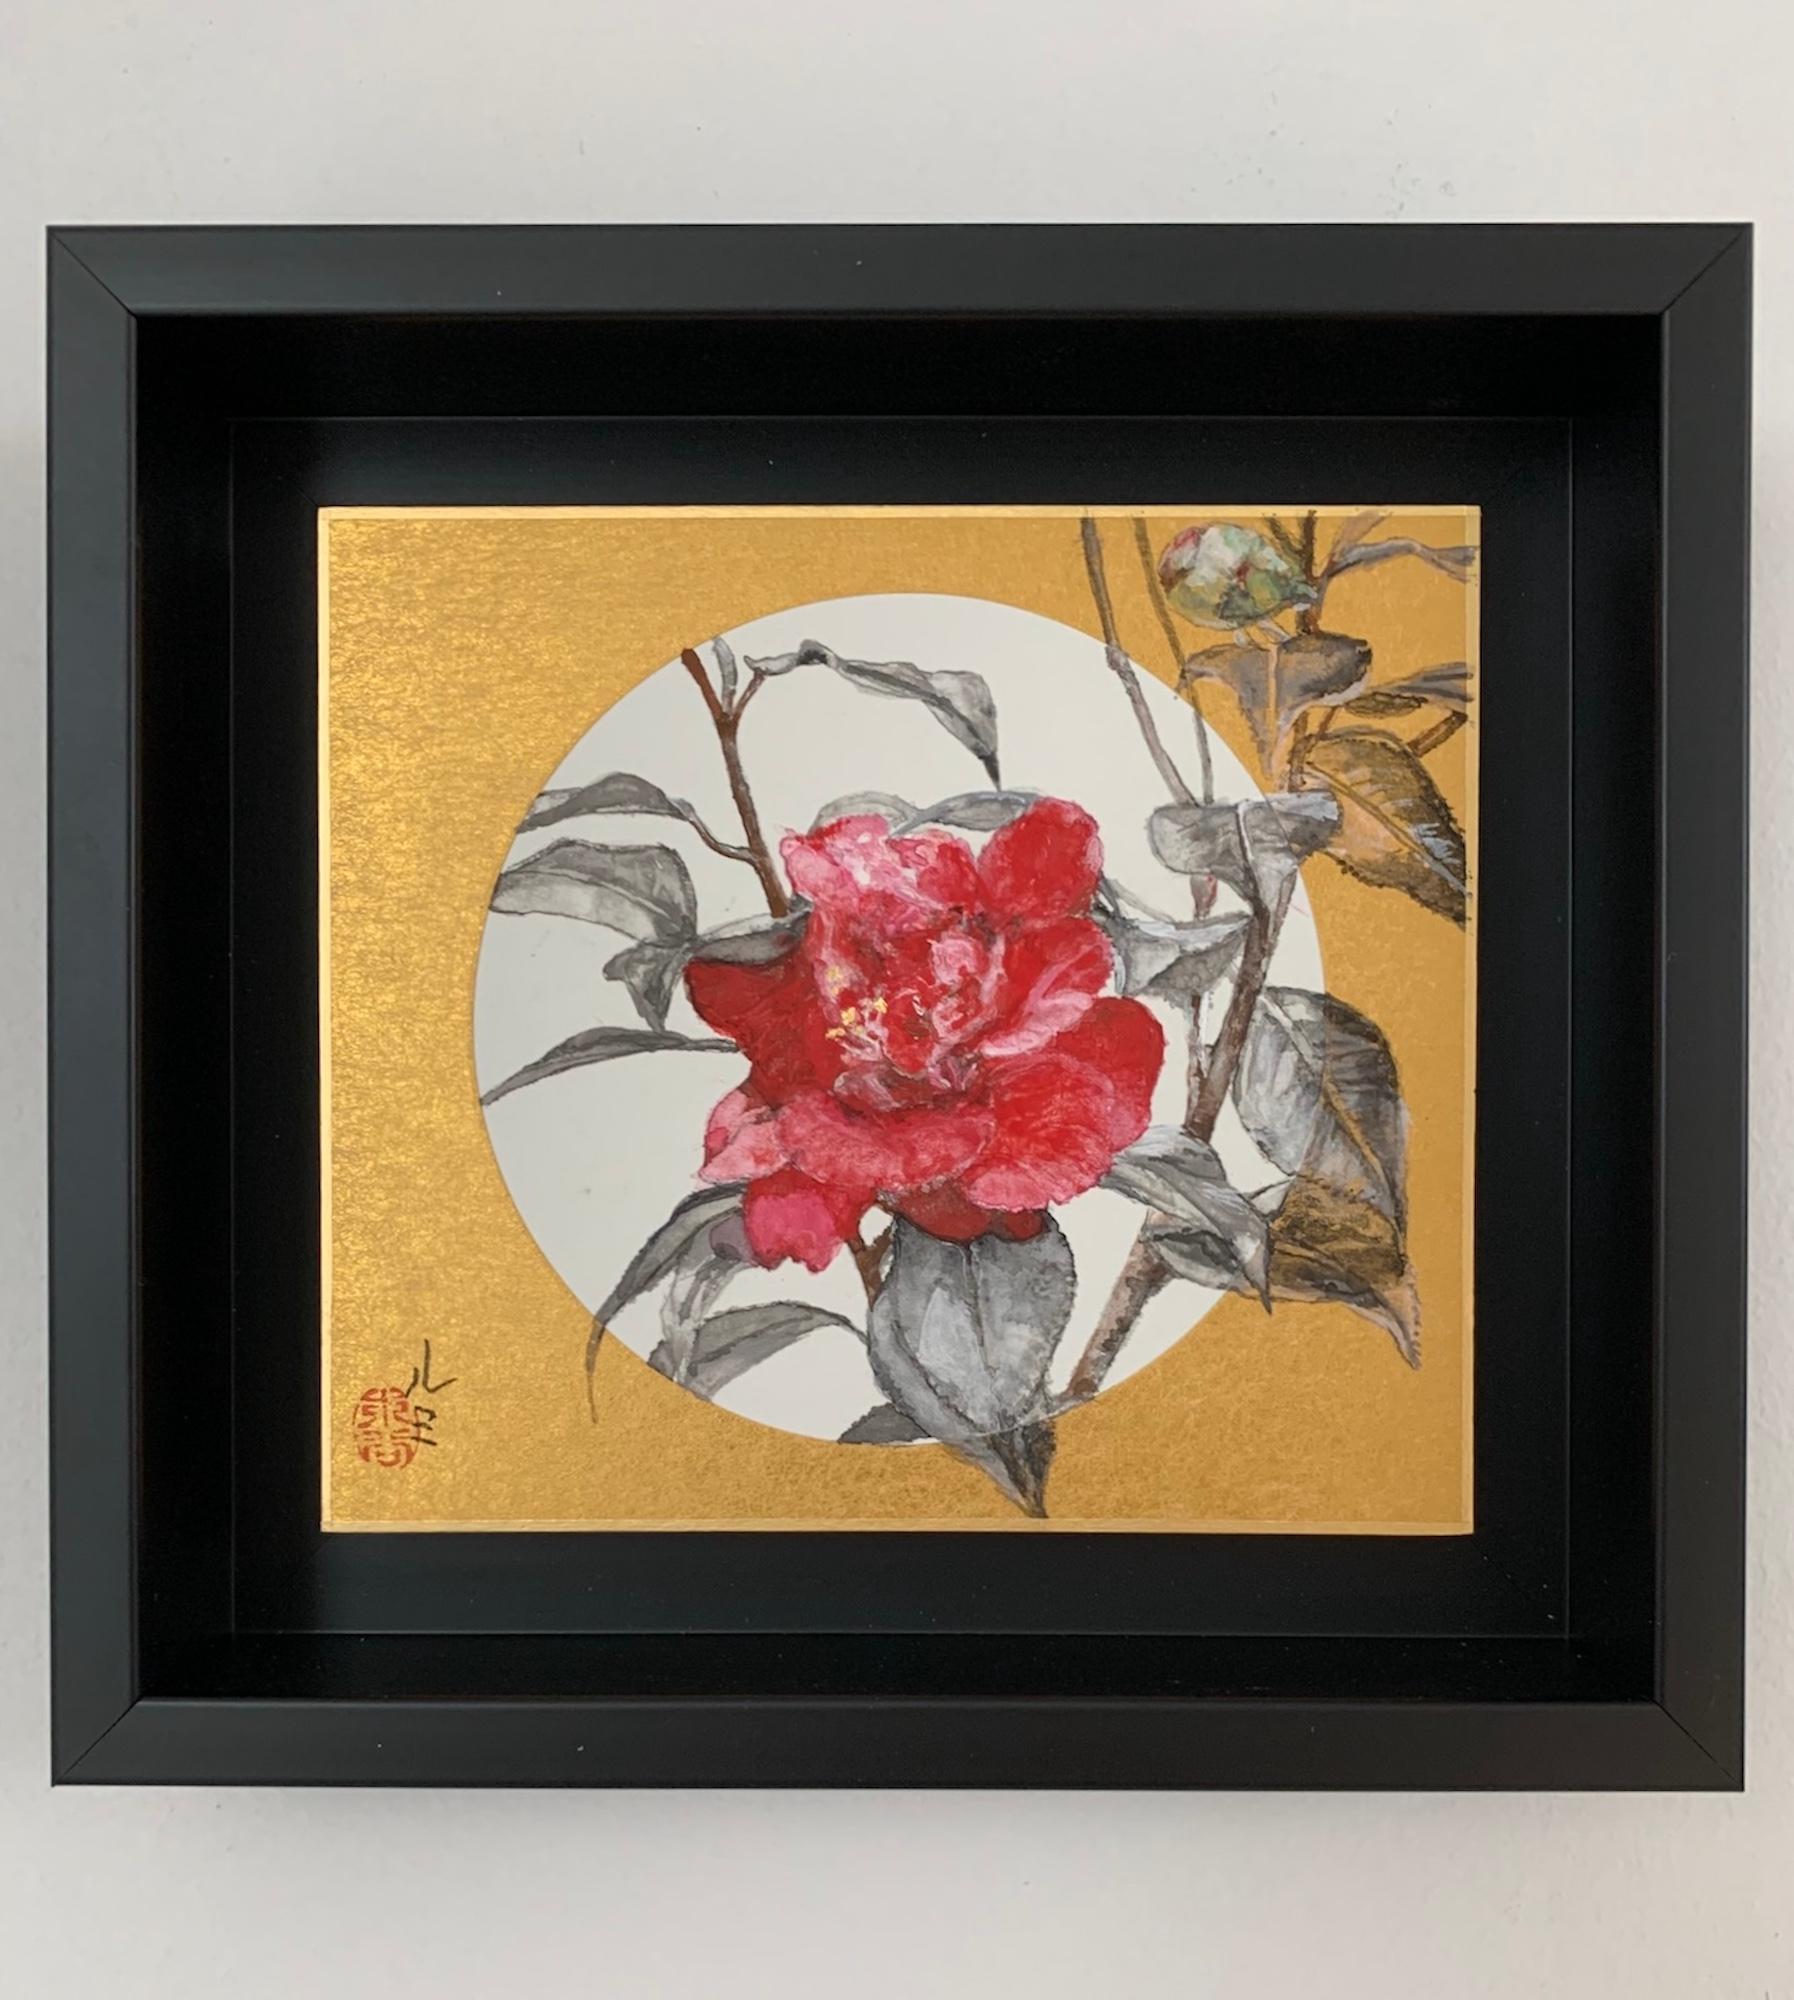 Camellia VIII is a unique painting by Japanese contemporary artist Lumi Mizutani. This painting is made with pigments, India ink and gold leaf on Japanese cardboard, dimensions of the framed artwork are 12.1 × 13.6 cm (4.8 × 5.4 in). 
The artwork is